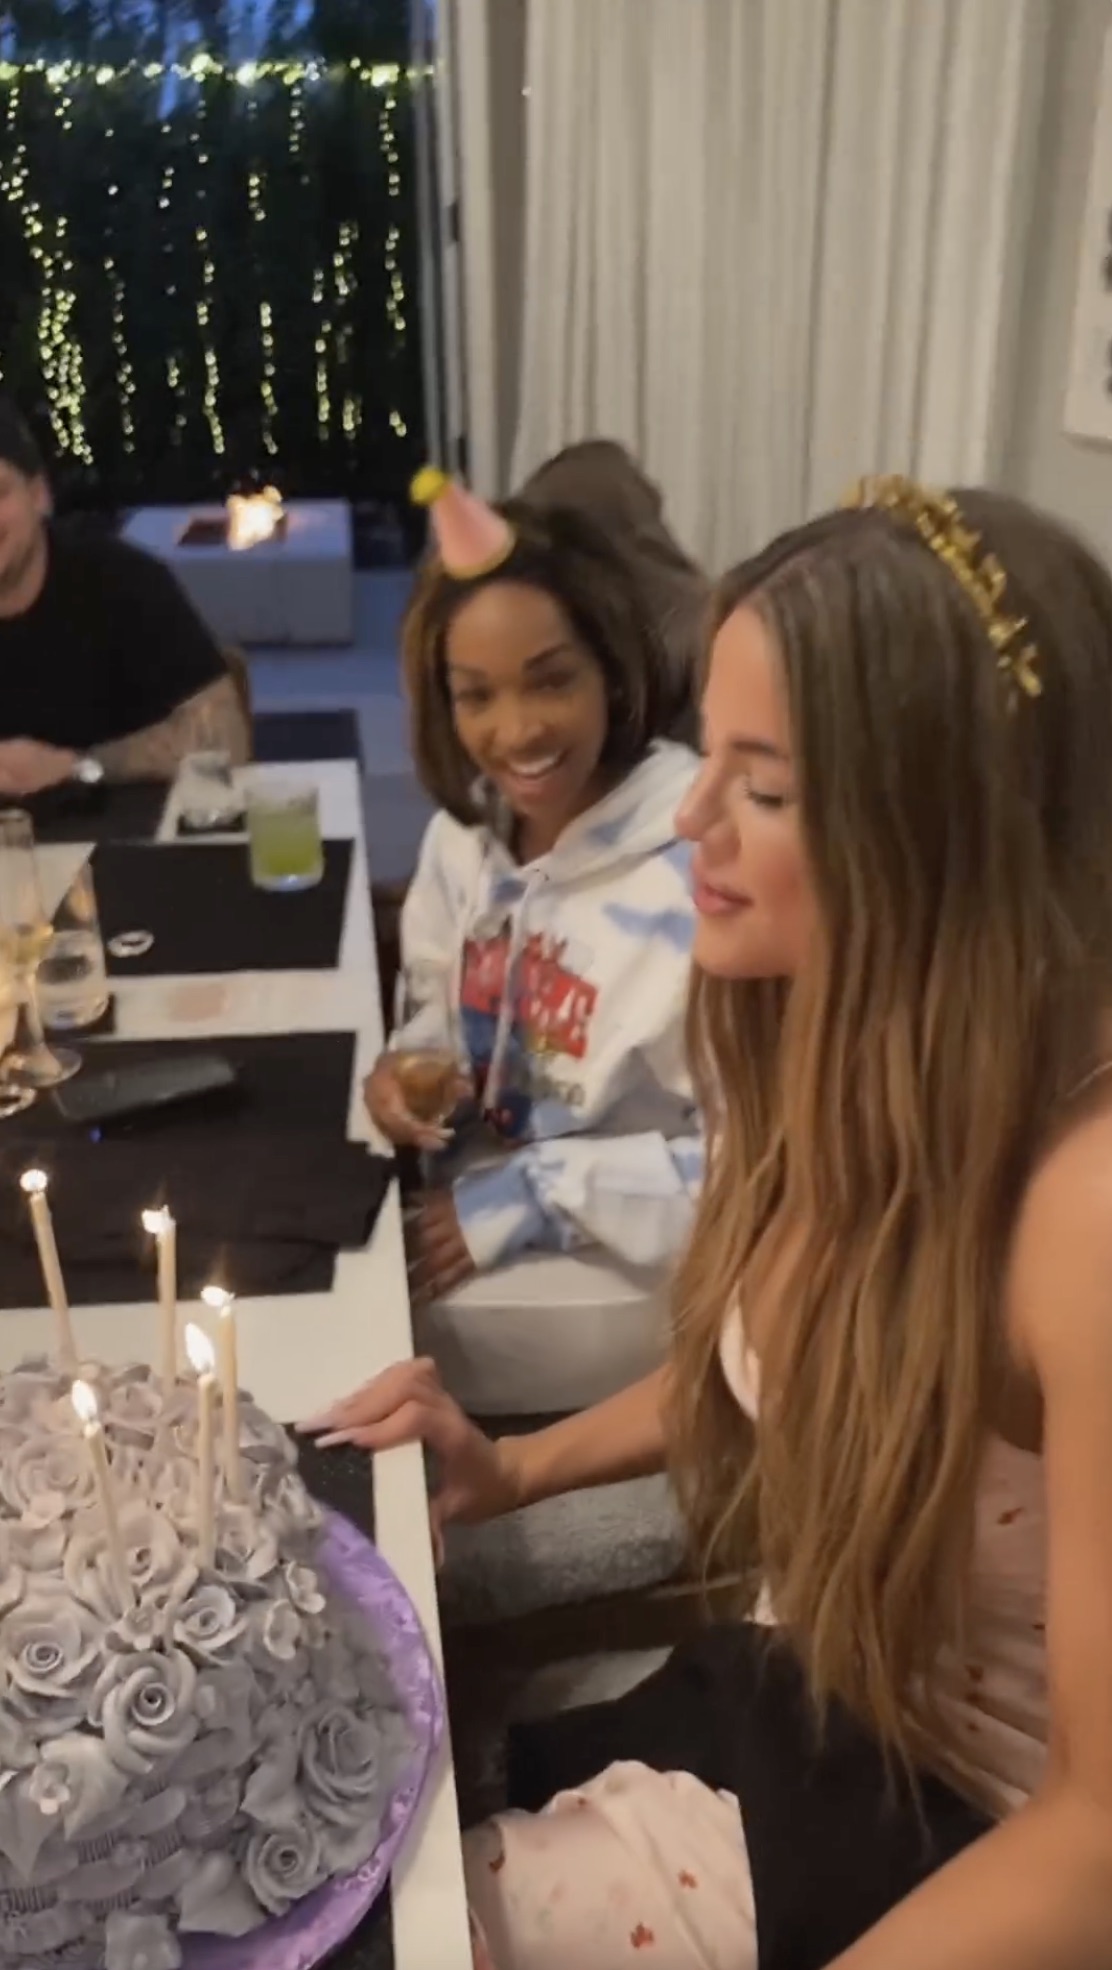 Khloe Kardashian celebrated her 40th birthday with friends and family